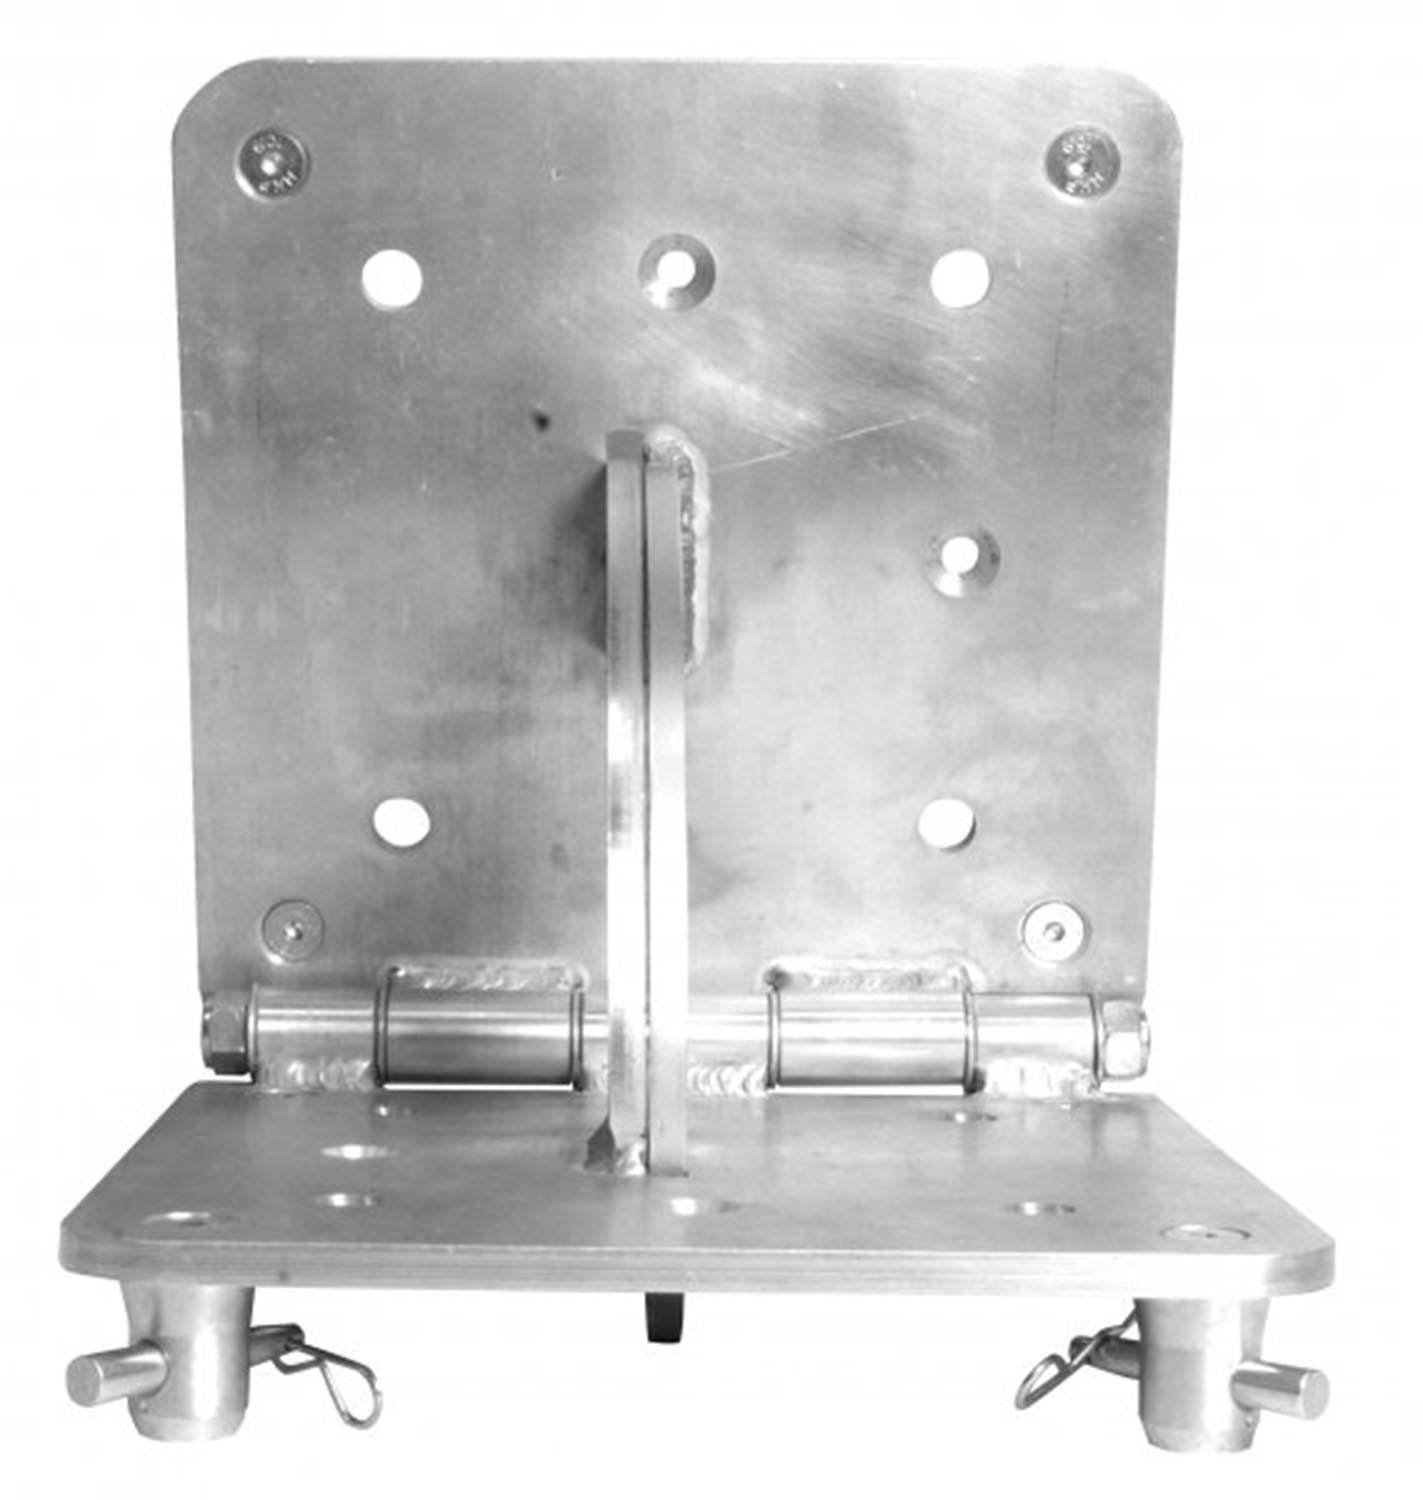 Trusst CT290-4VH, 10-mm Thick Aluminum Versa Hinge For Positioning Of Truss Sections - Hollywood DJ